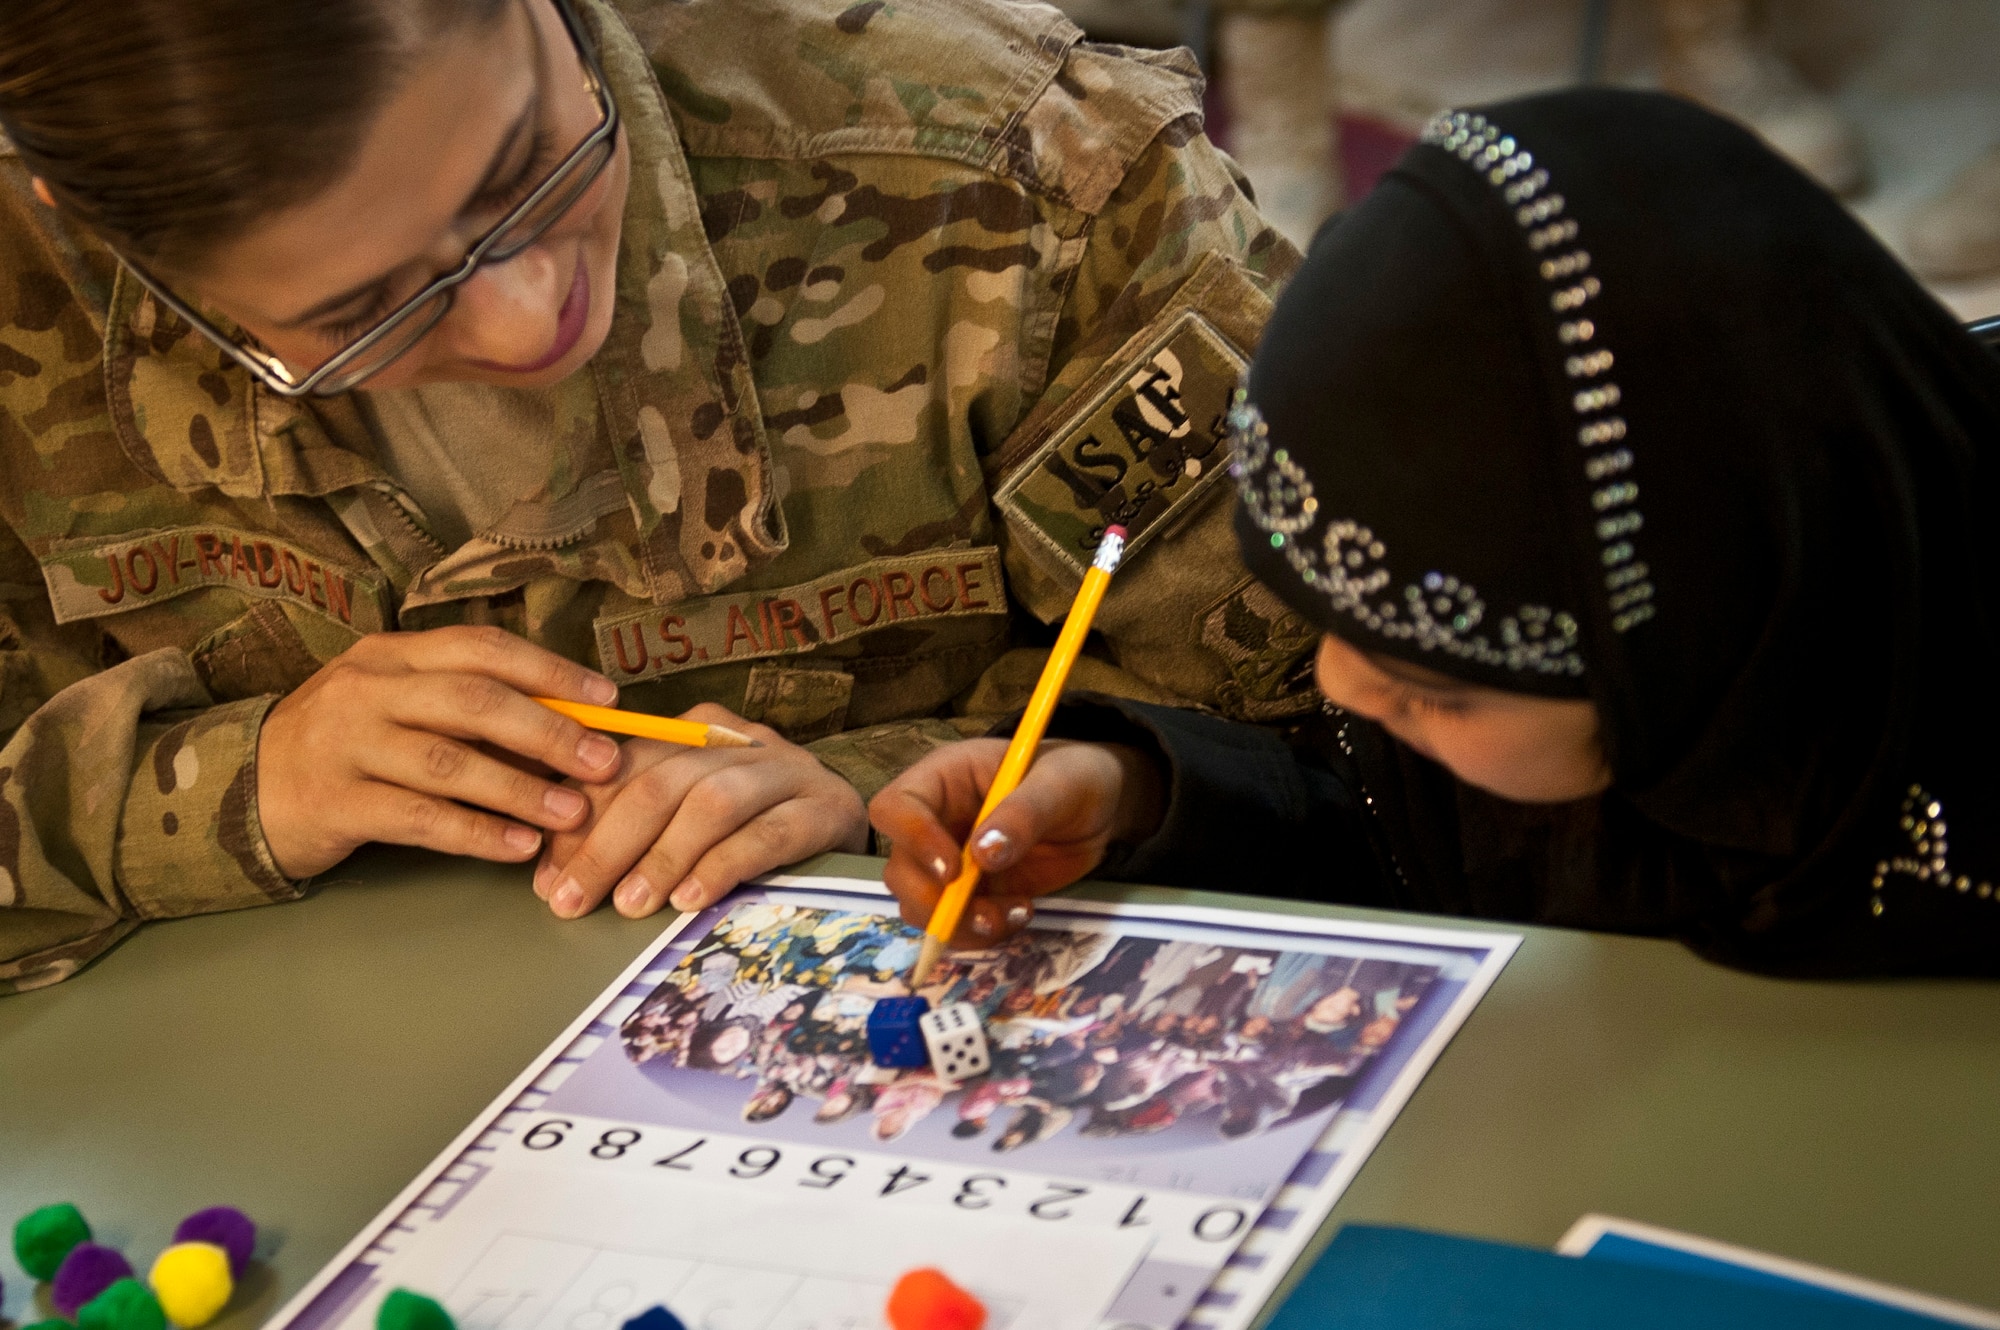 Yagana, a local Afghan student, and Capt. Angela Joy-Radden, a volunteer from the 455th Expeditionary Operations Support Squadron, play a counting game together during a “Cat in the Hat” education session at Bagram Airfield, Afghanistan, Oct. 14, 2012. Bagram volunteers come out every week to mentor and educate local youth. (U.S. Air Force photo/Capt. Raymond Geoffroy)